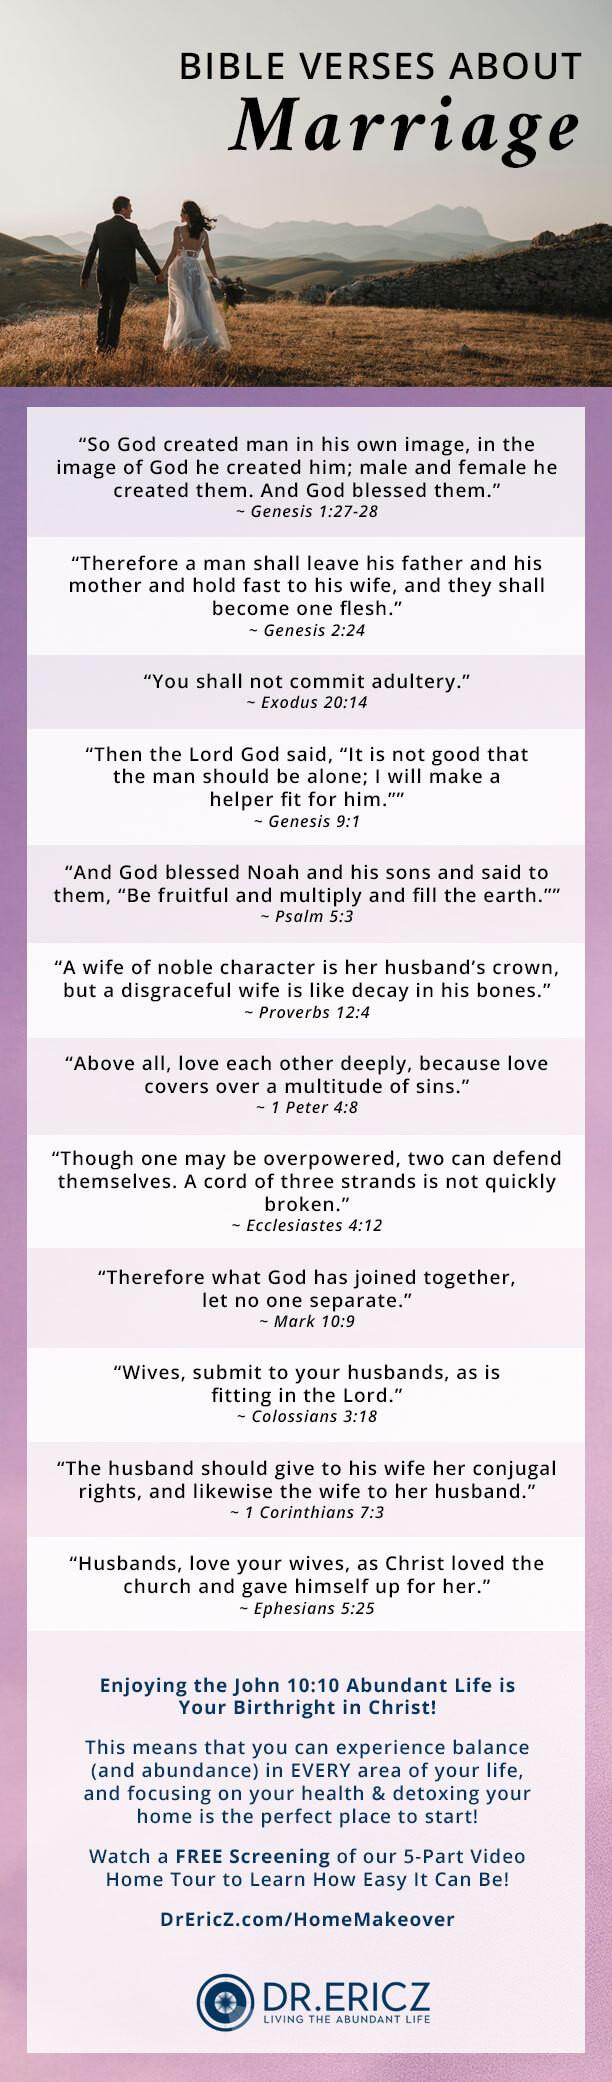 Bible Quotes About Marriage
 Bible Verses About Marriage for a Strong and Vibrant